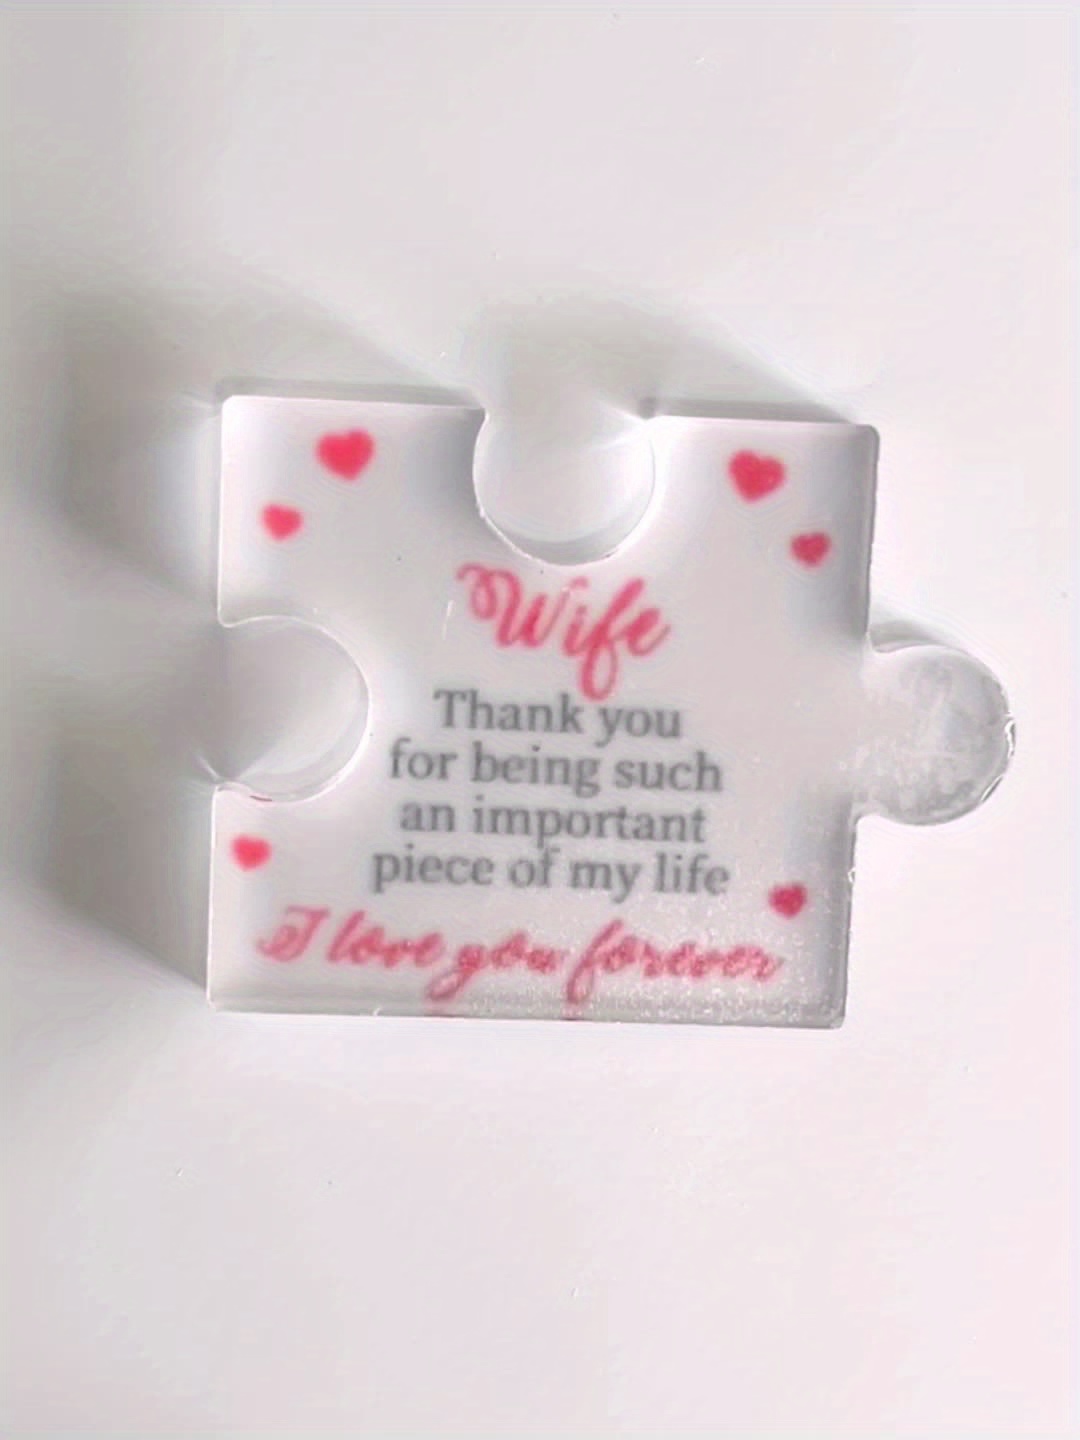 Valentine's Gifts for Wife - Engraved Acrylic Block Puzzle Wife